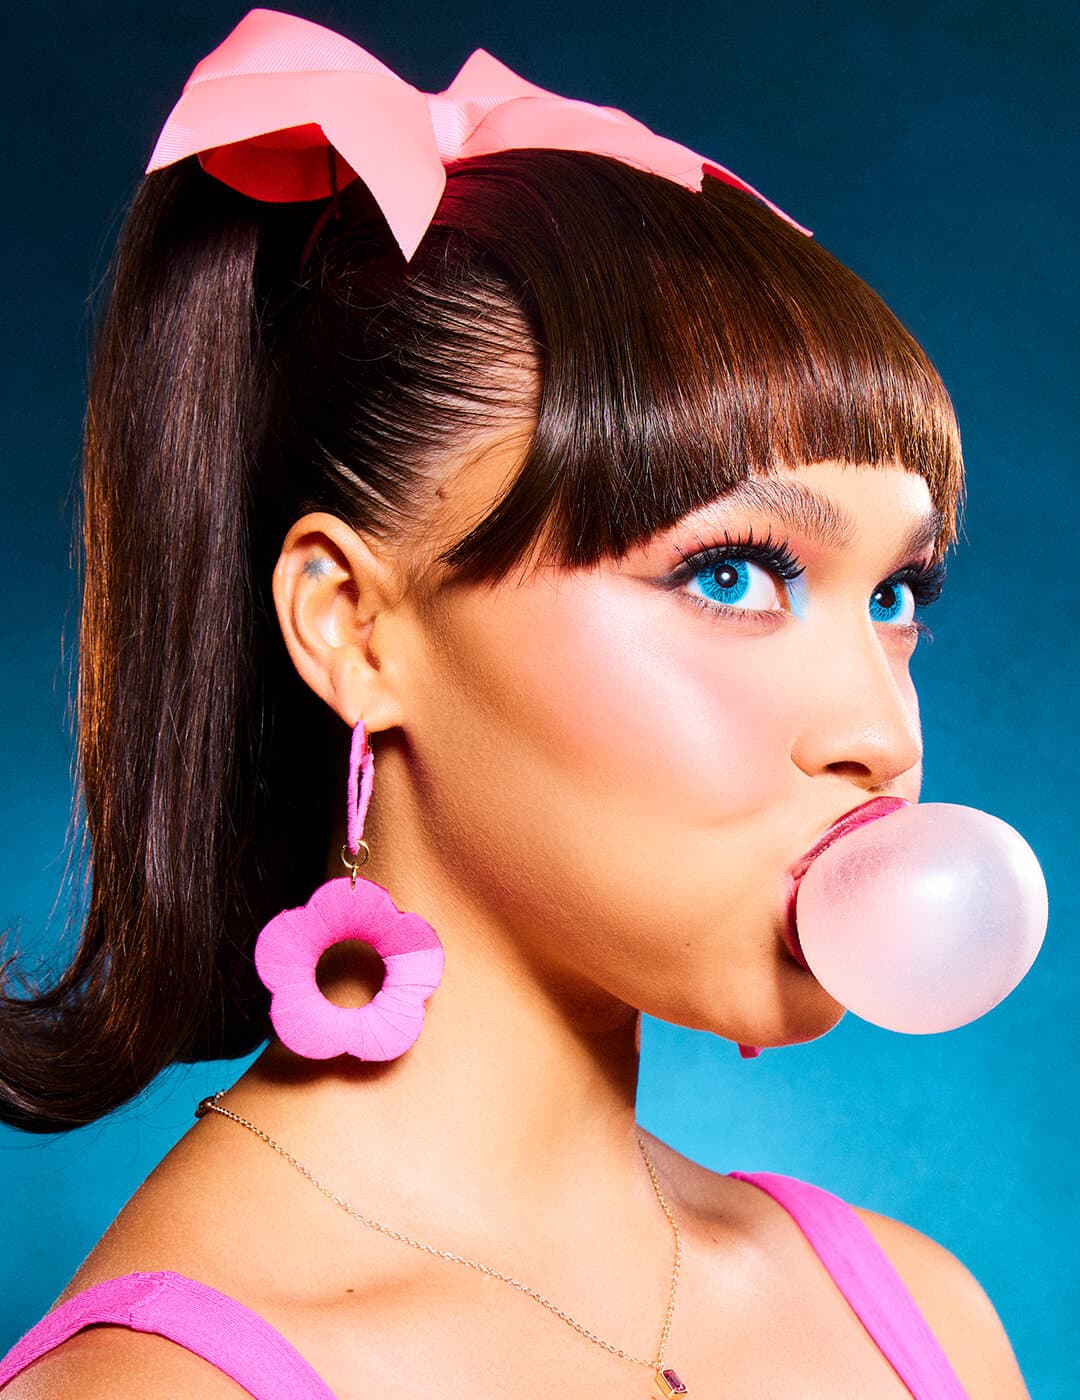 Model in a blue eye makeup look, pink dress, earrings, and bow blowing a bubblegum